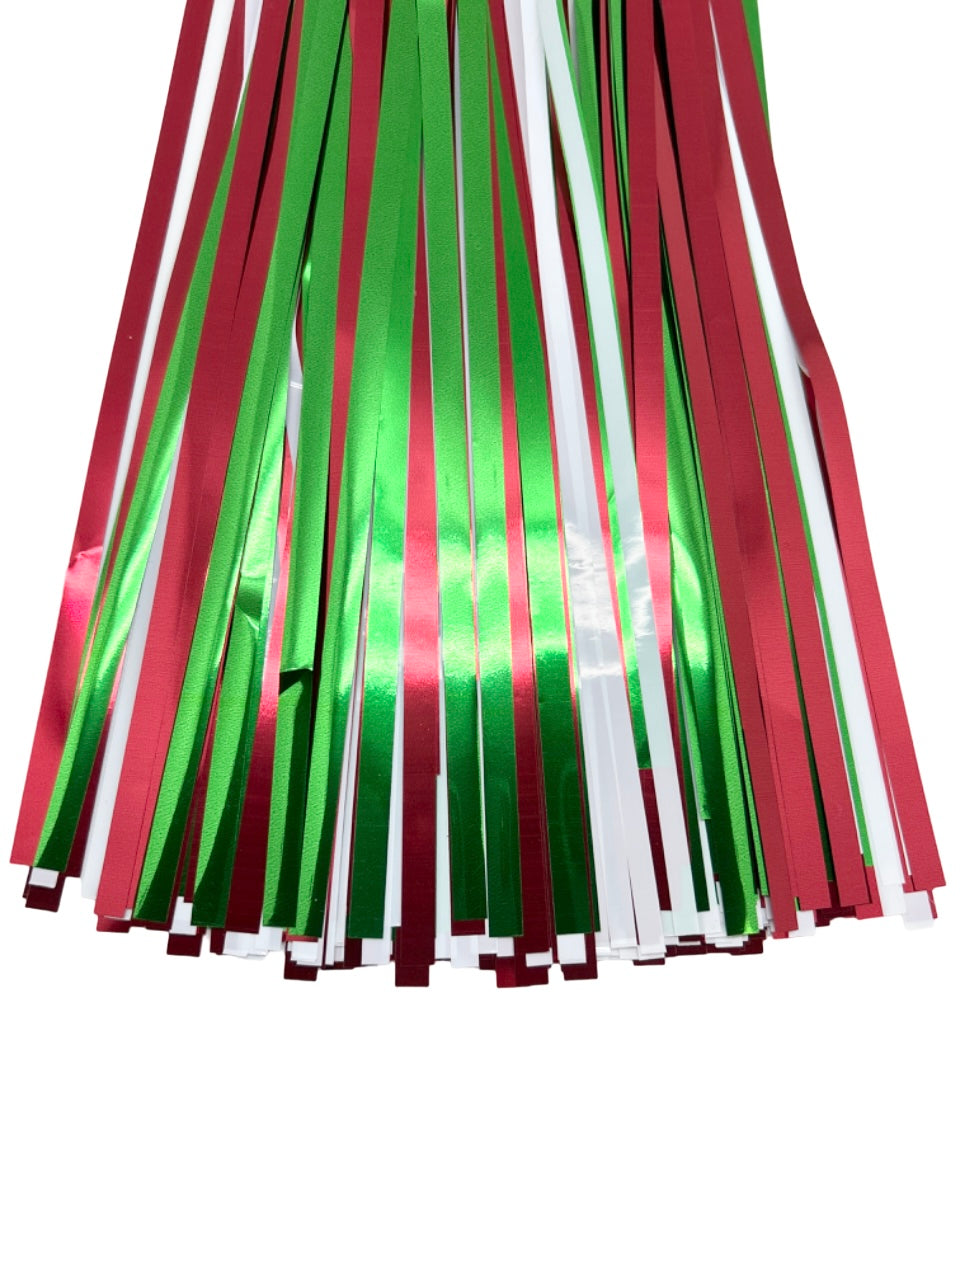 15" x 10' Red, Green, and White Fringe